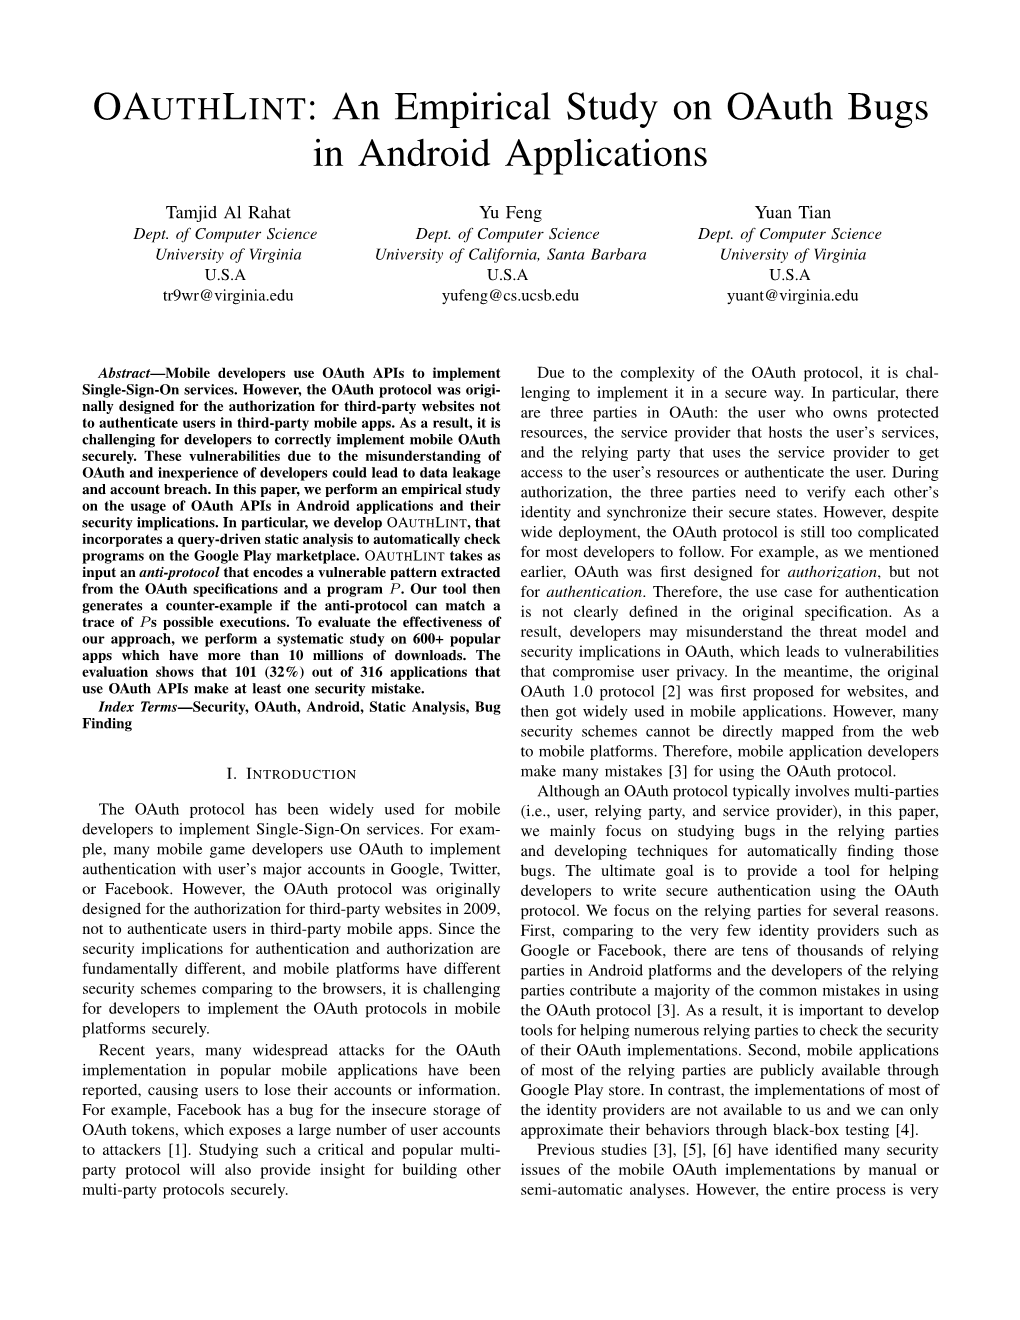 An Empirical Study on Oauth Bugs in Android Applications